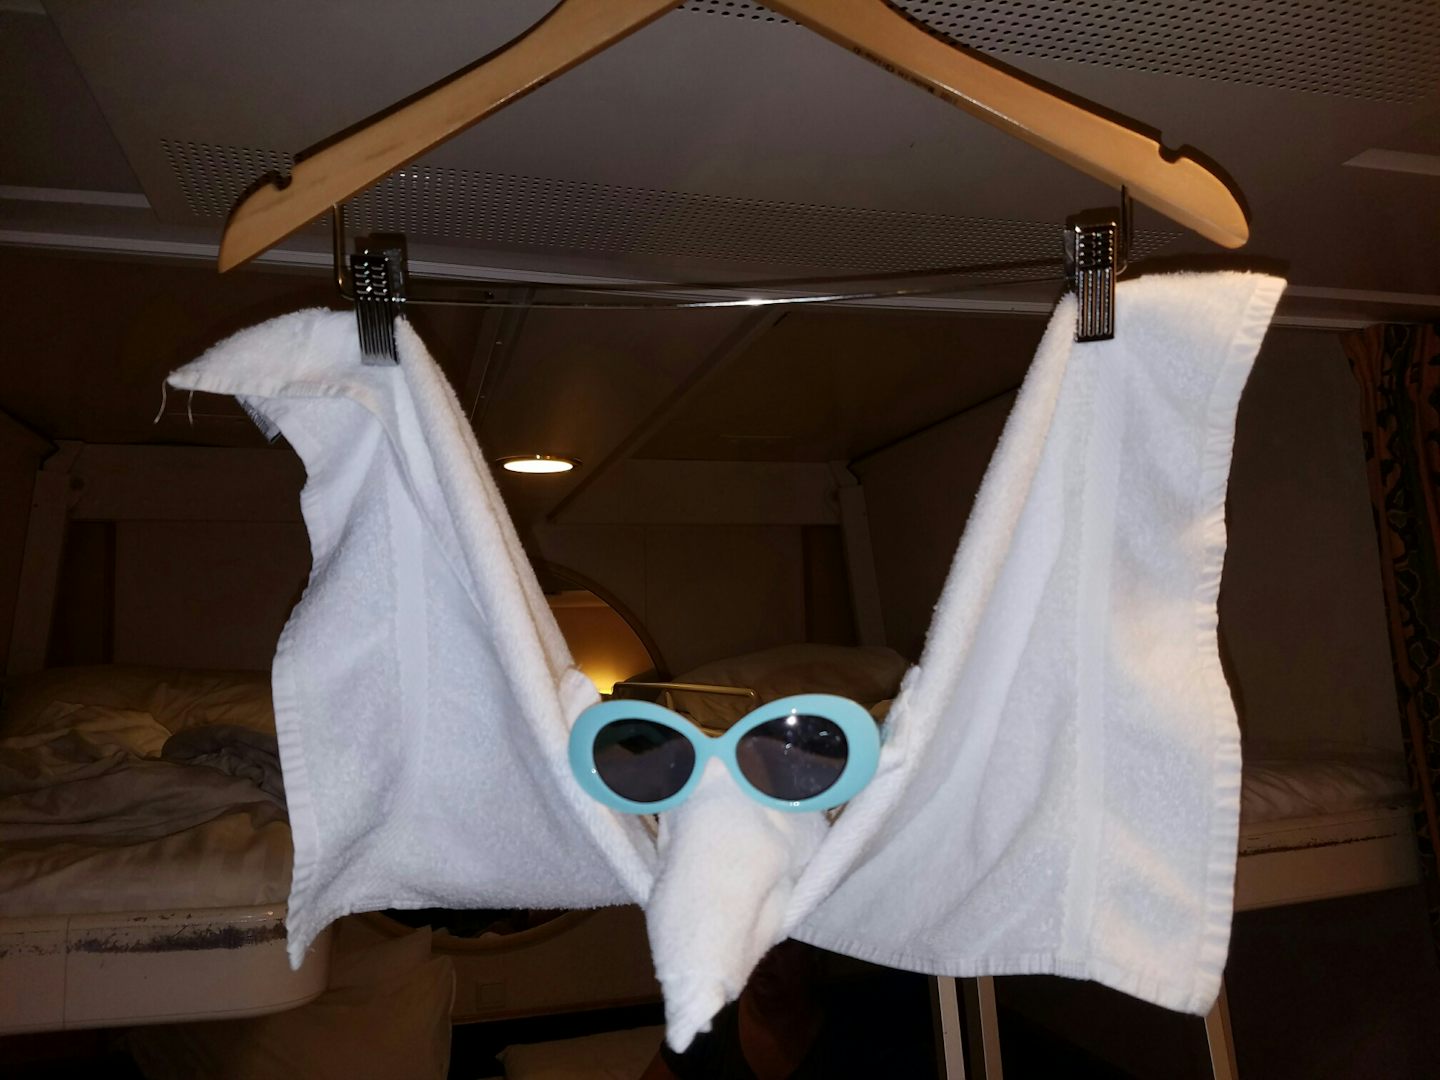 One of Many Towel Decorations left in our stateroom